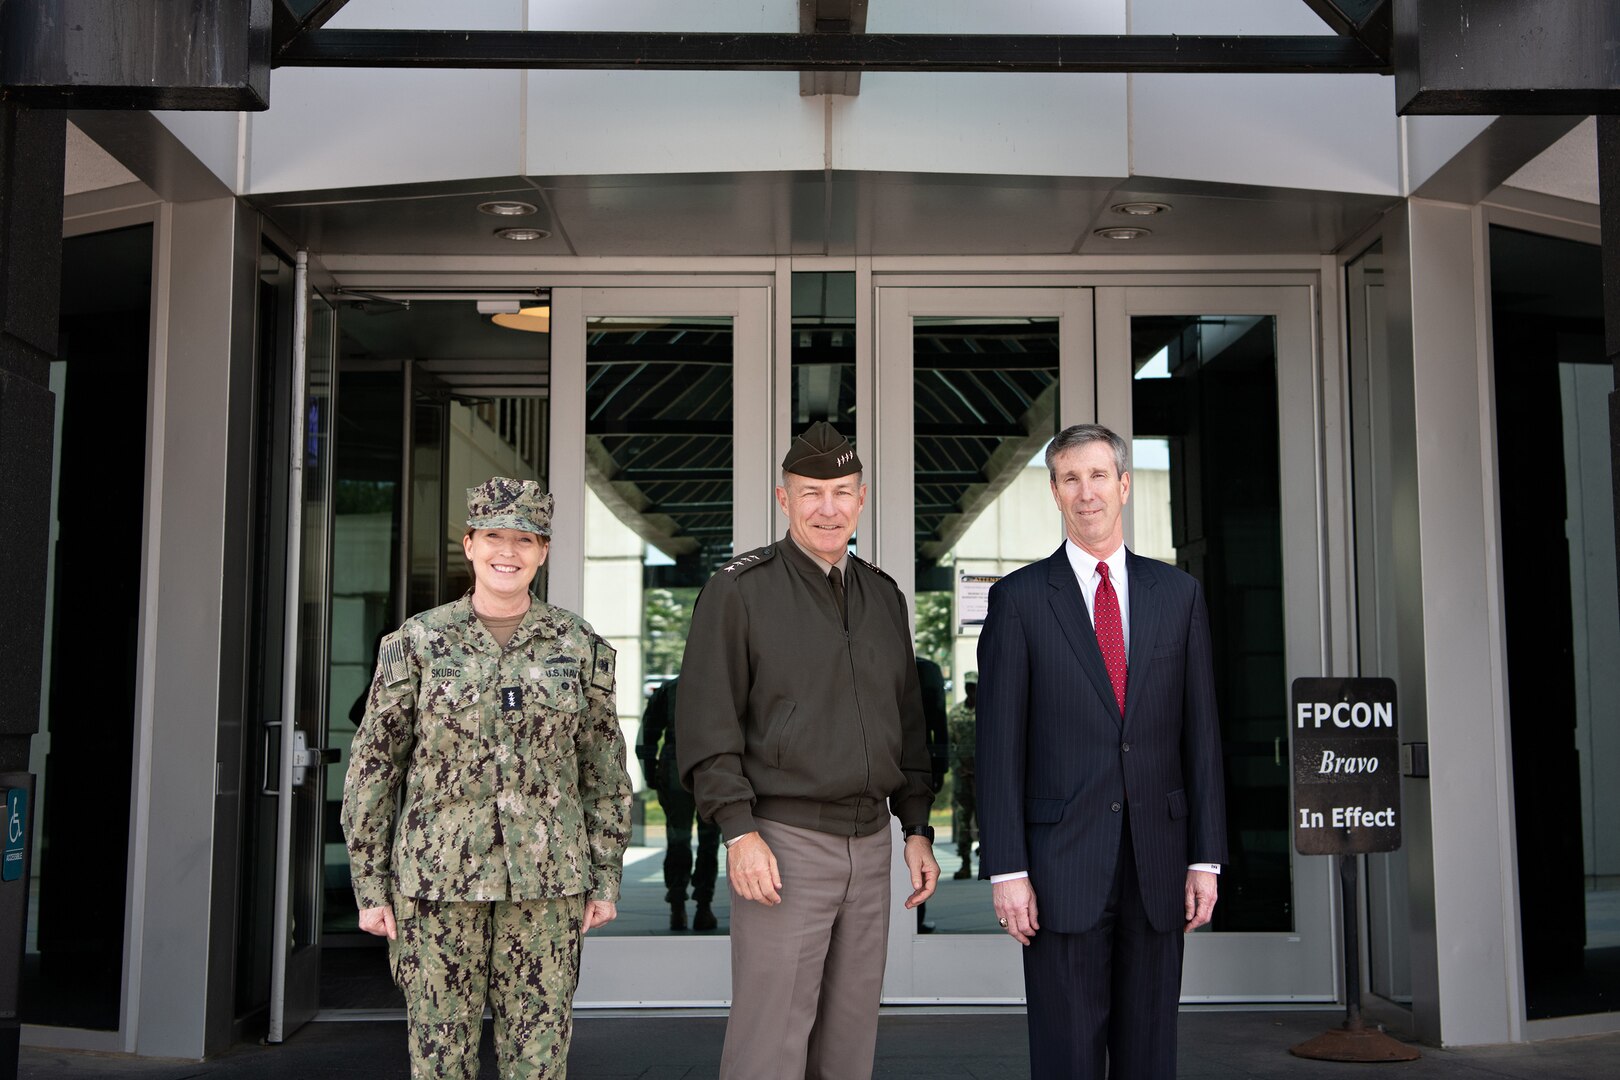 Vice Admiral Michelle Skubic, Director, Defense Logistics Agency (DLA) (left) and Dr. Rhys M. Williams, Acting Director, Defense Threat Reduction Agency (DTRA) (right) greet General James C. McConville, Chief of Staff of the U.S. Army in front of DLA headquarters prior to   the retirement ceremony for Mr. Michael L. Bruhn, SES, Senior Executive Advisor, Defense Threat Reduction Agency.